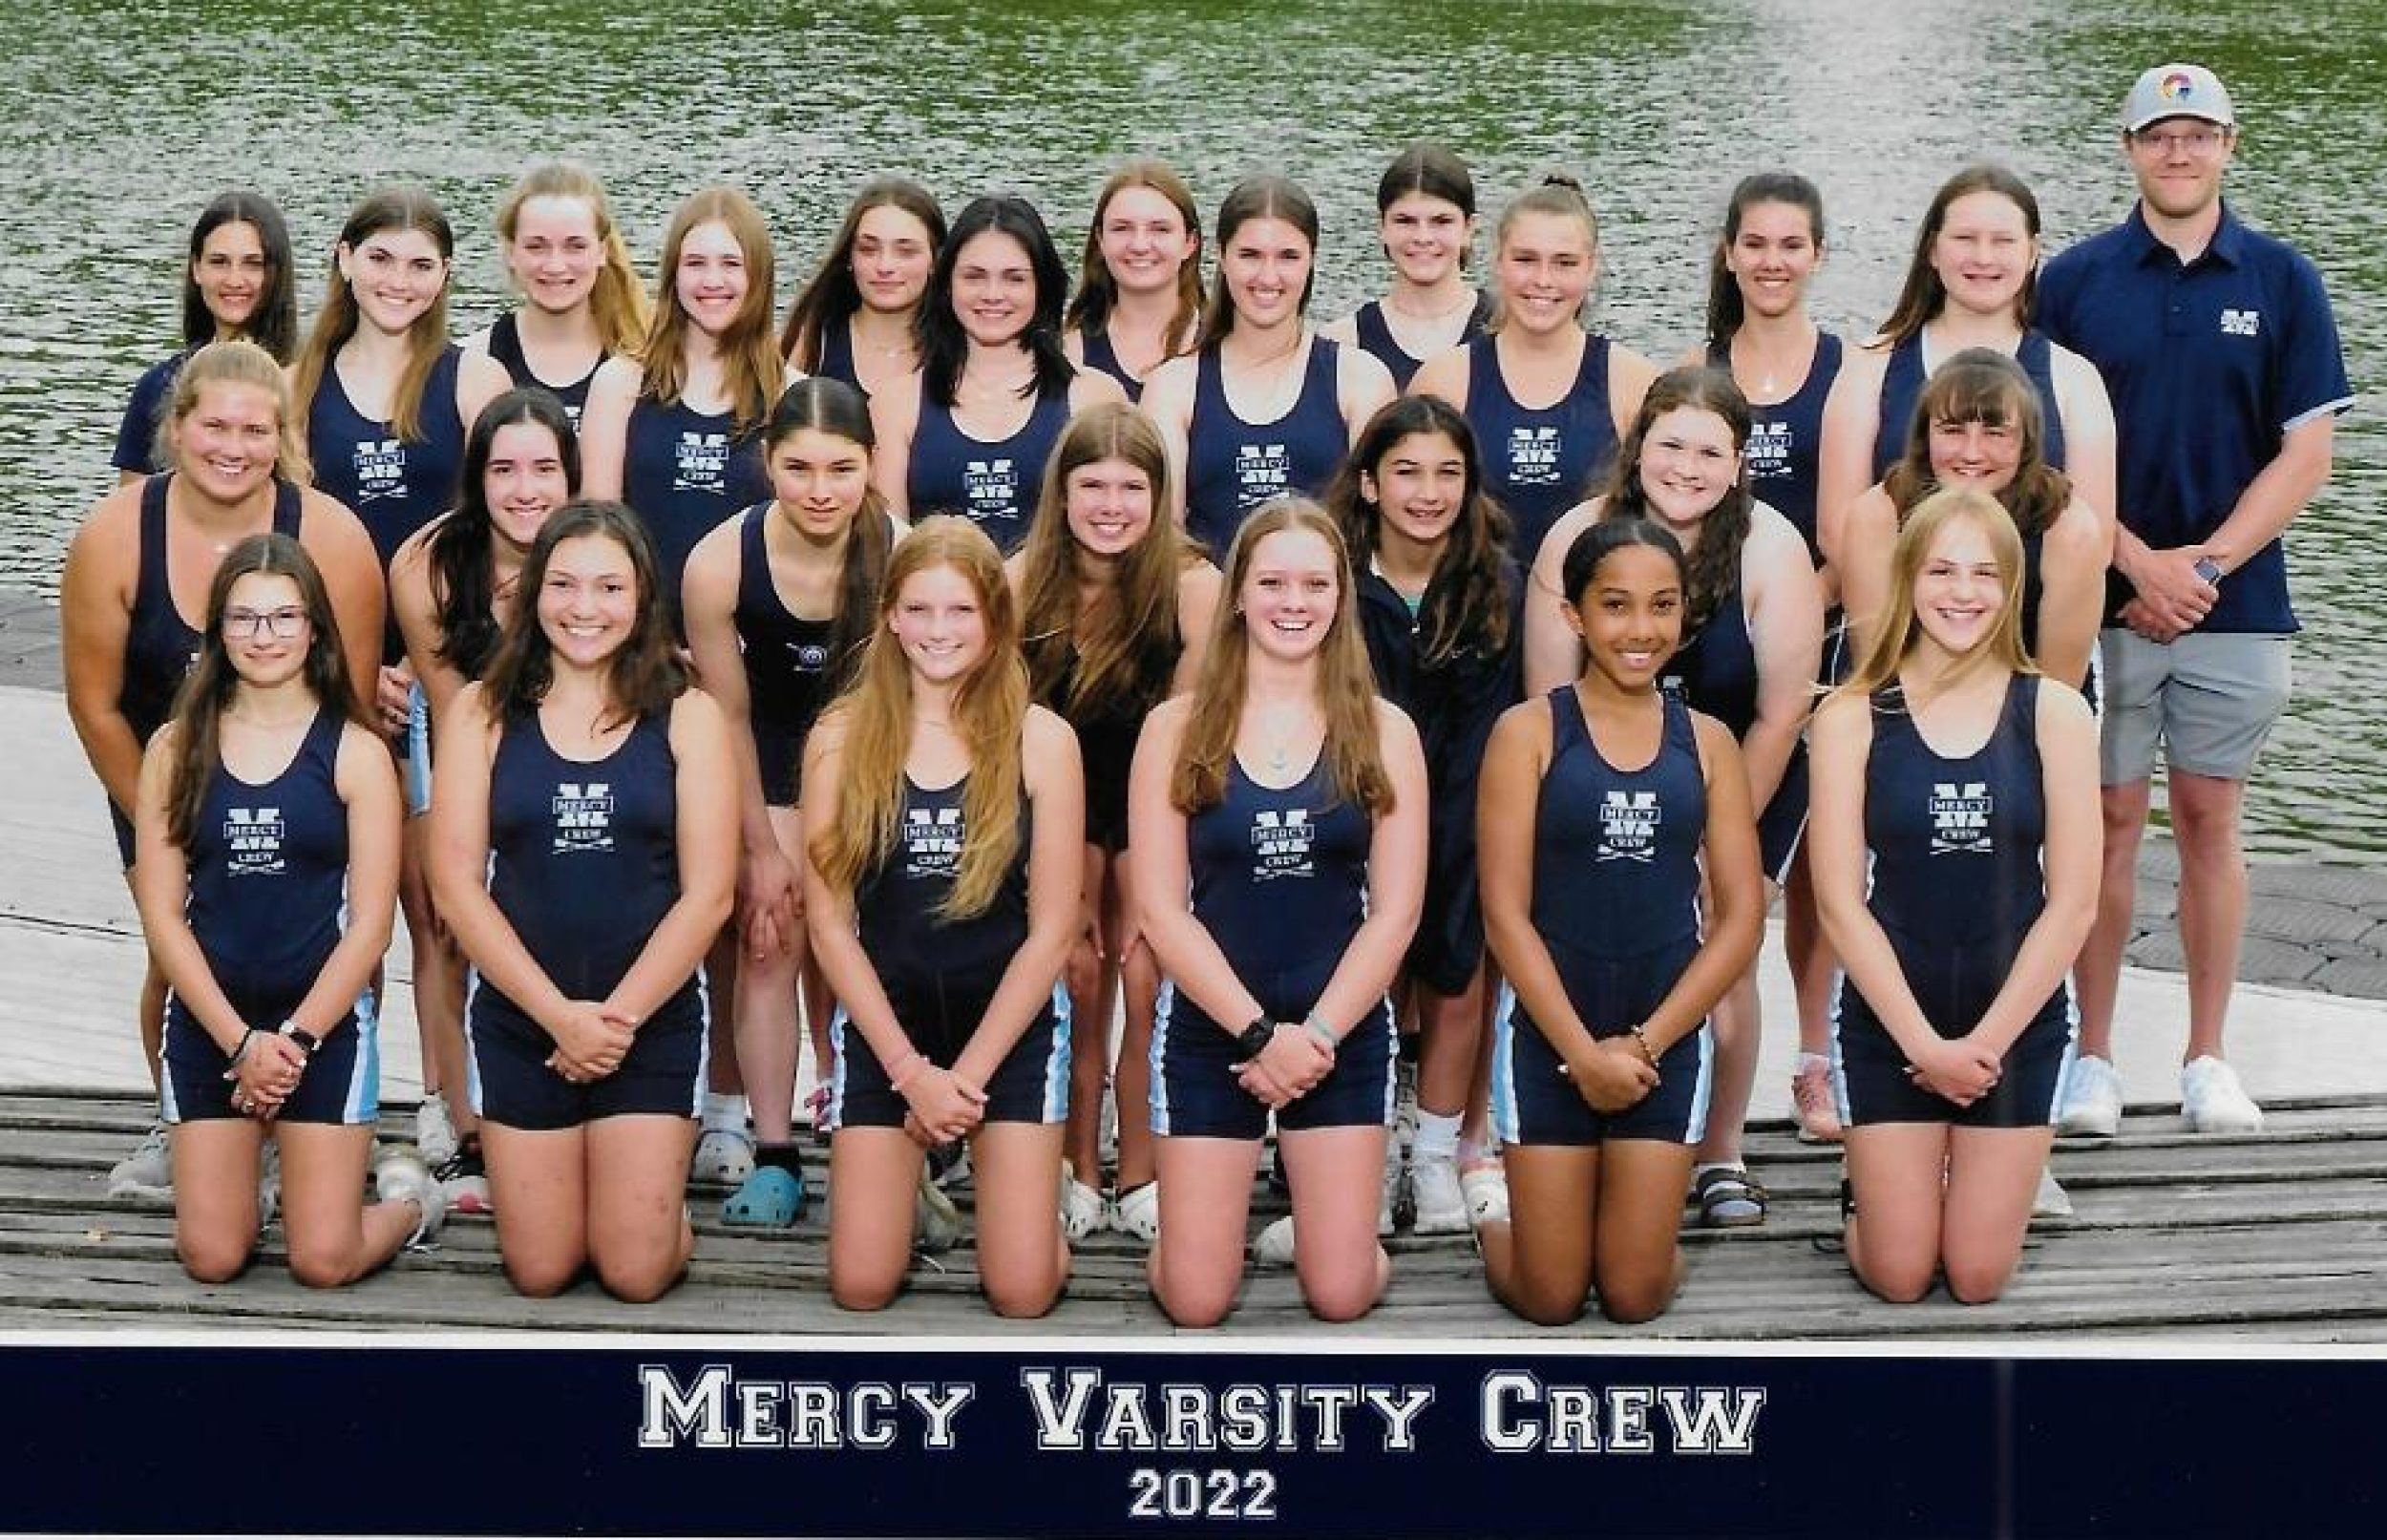 Our Lady of Mercy Crew